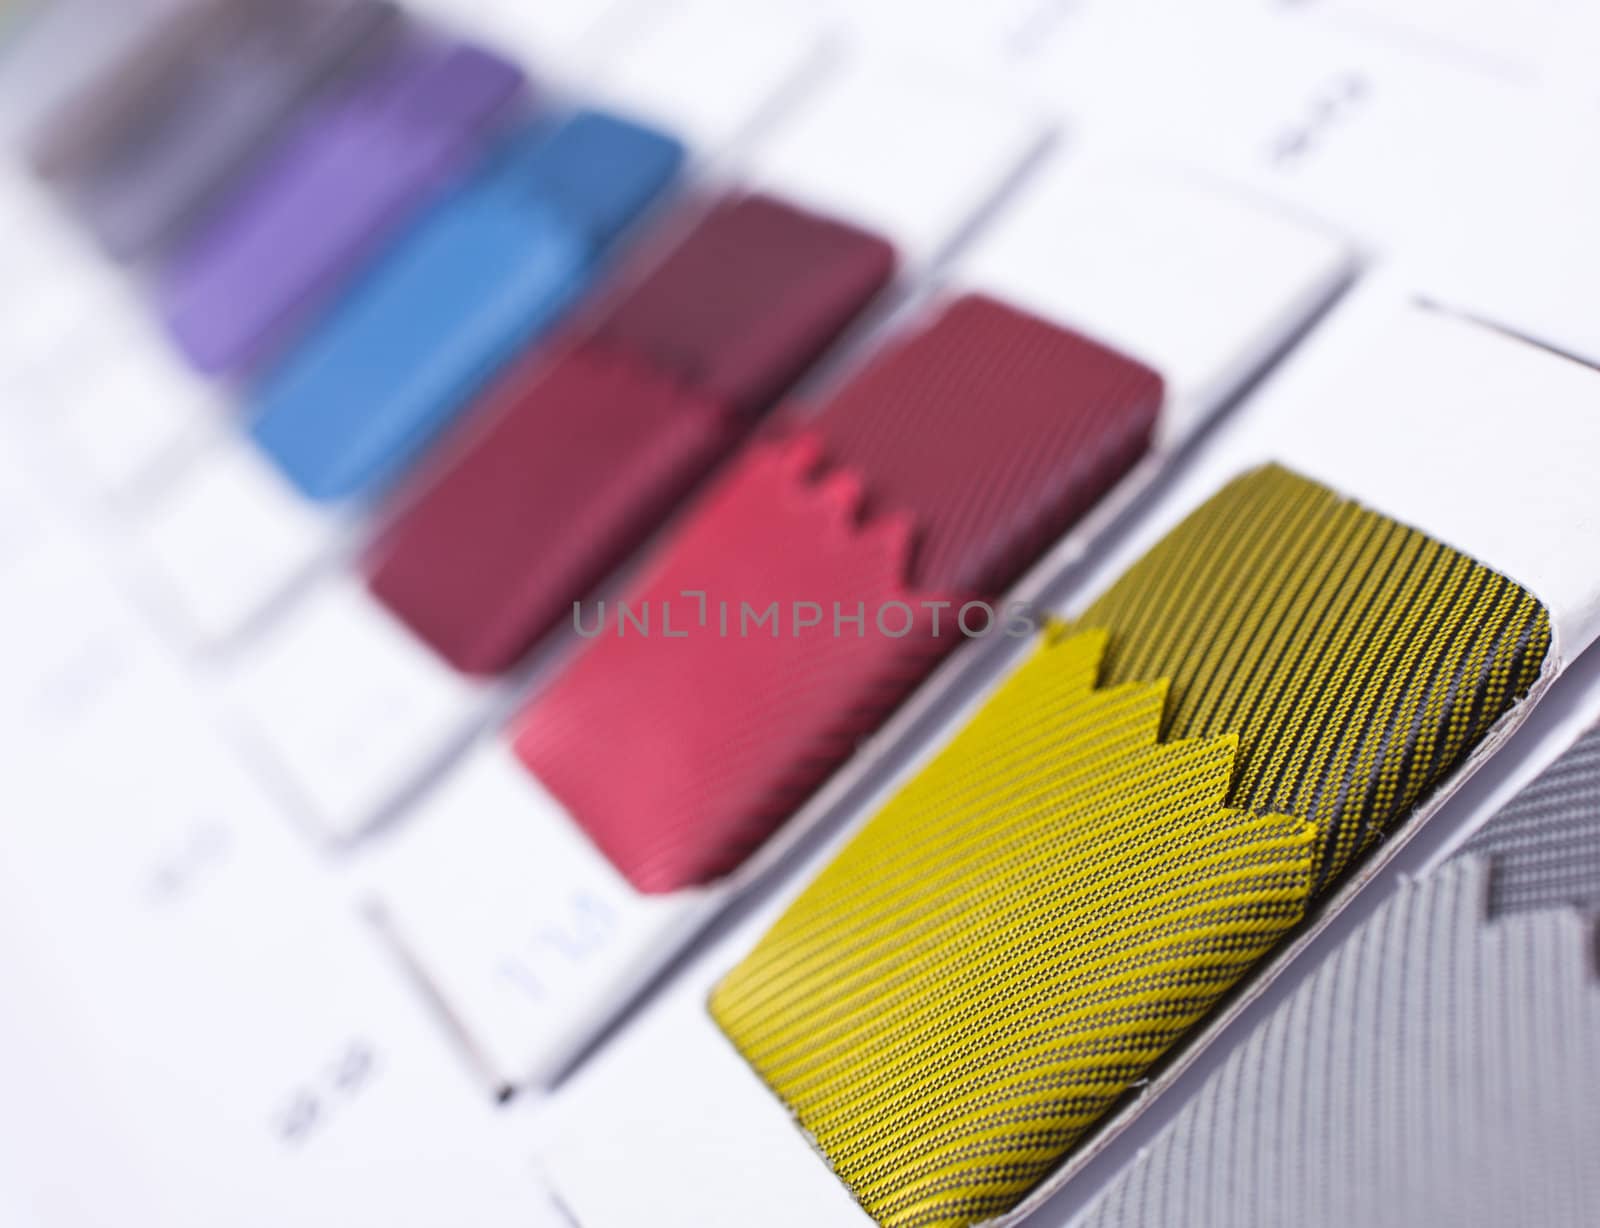 fabric color samples palette  by Suriyaphoto